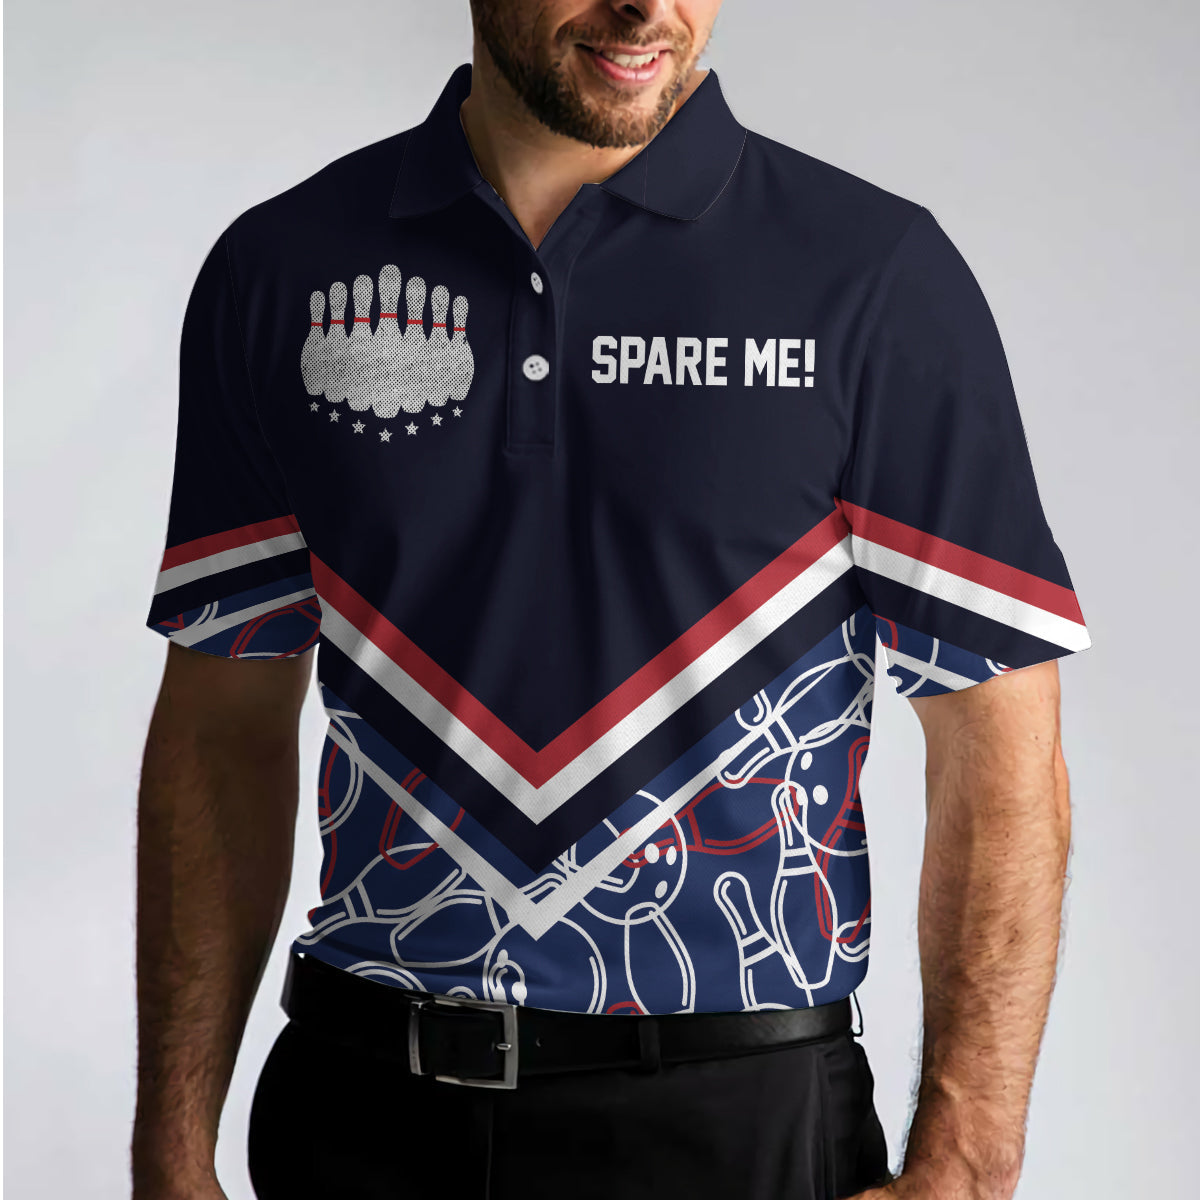 Spare Me Bowling Short Sleeve Polo Shirt/ Bowling Ball And Pin Pattern Polo Shirt/ Best Bowling Shirt For Men Coolspod